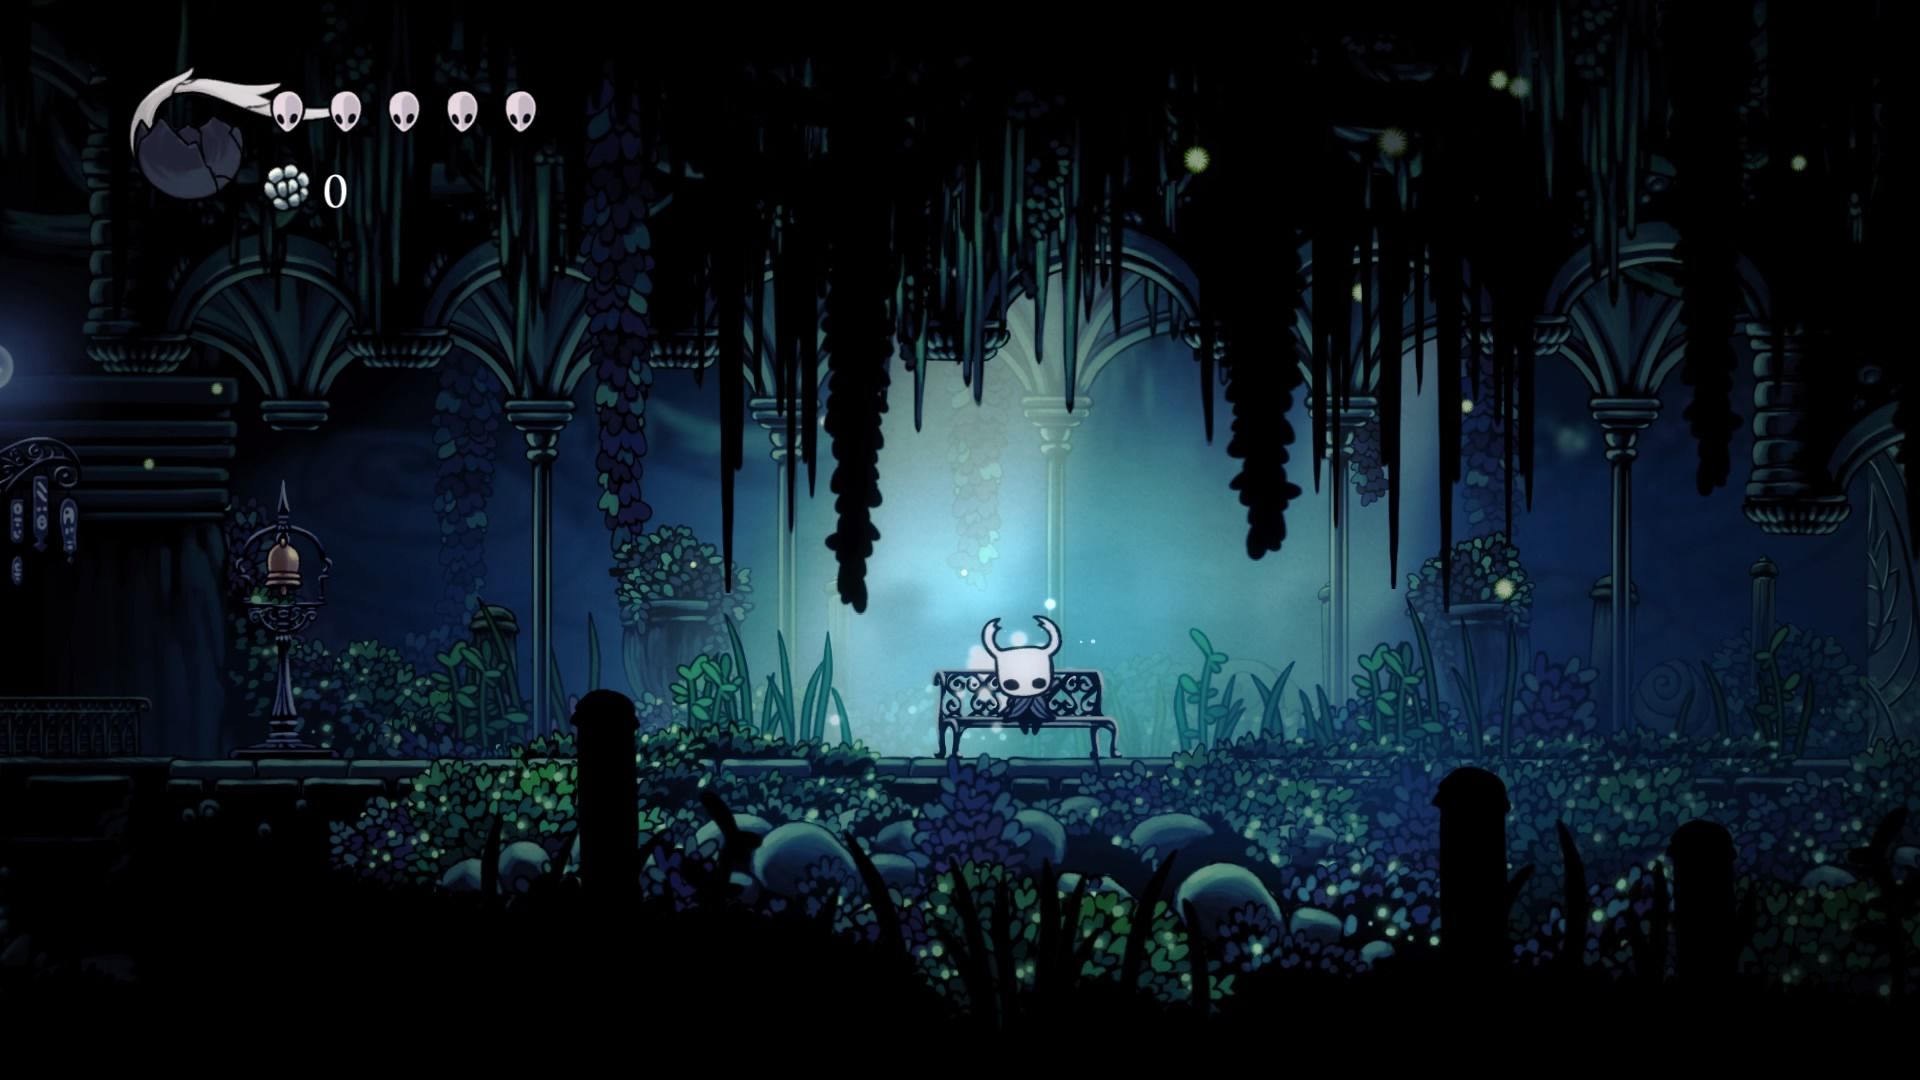 A bug from Hollow Knight sitting on a bench